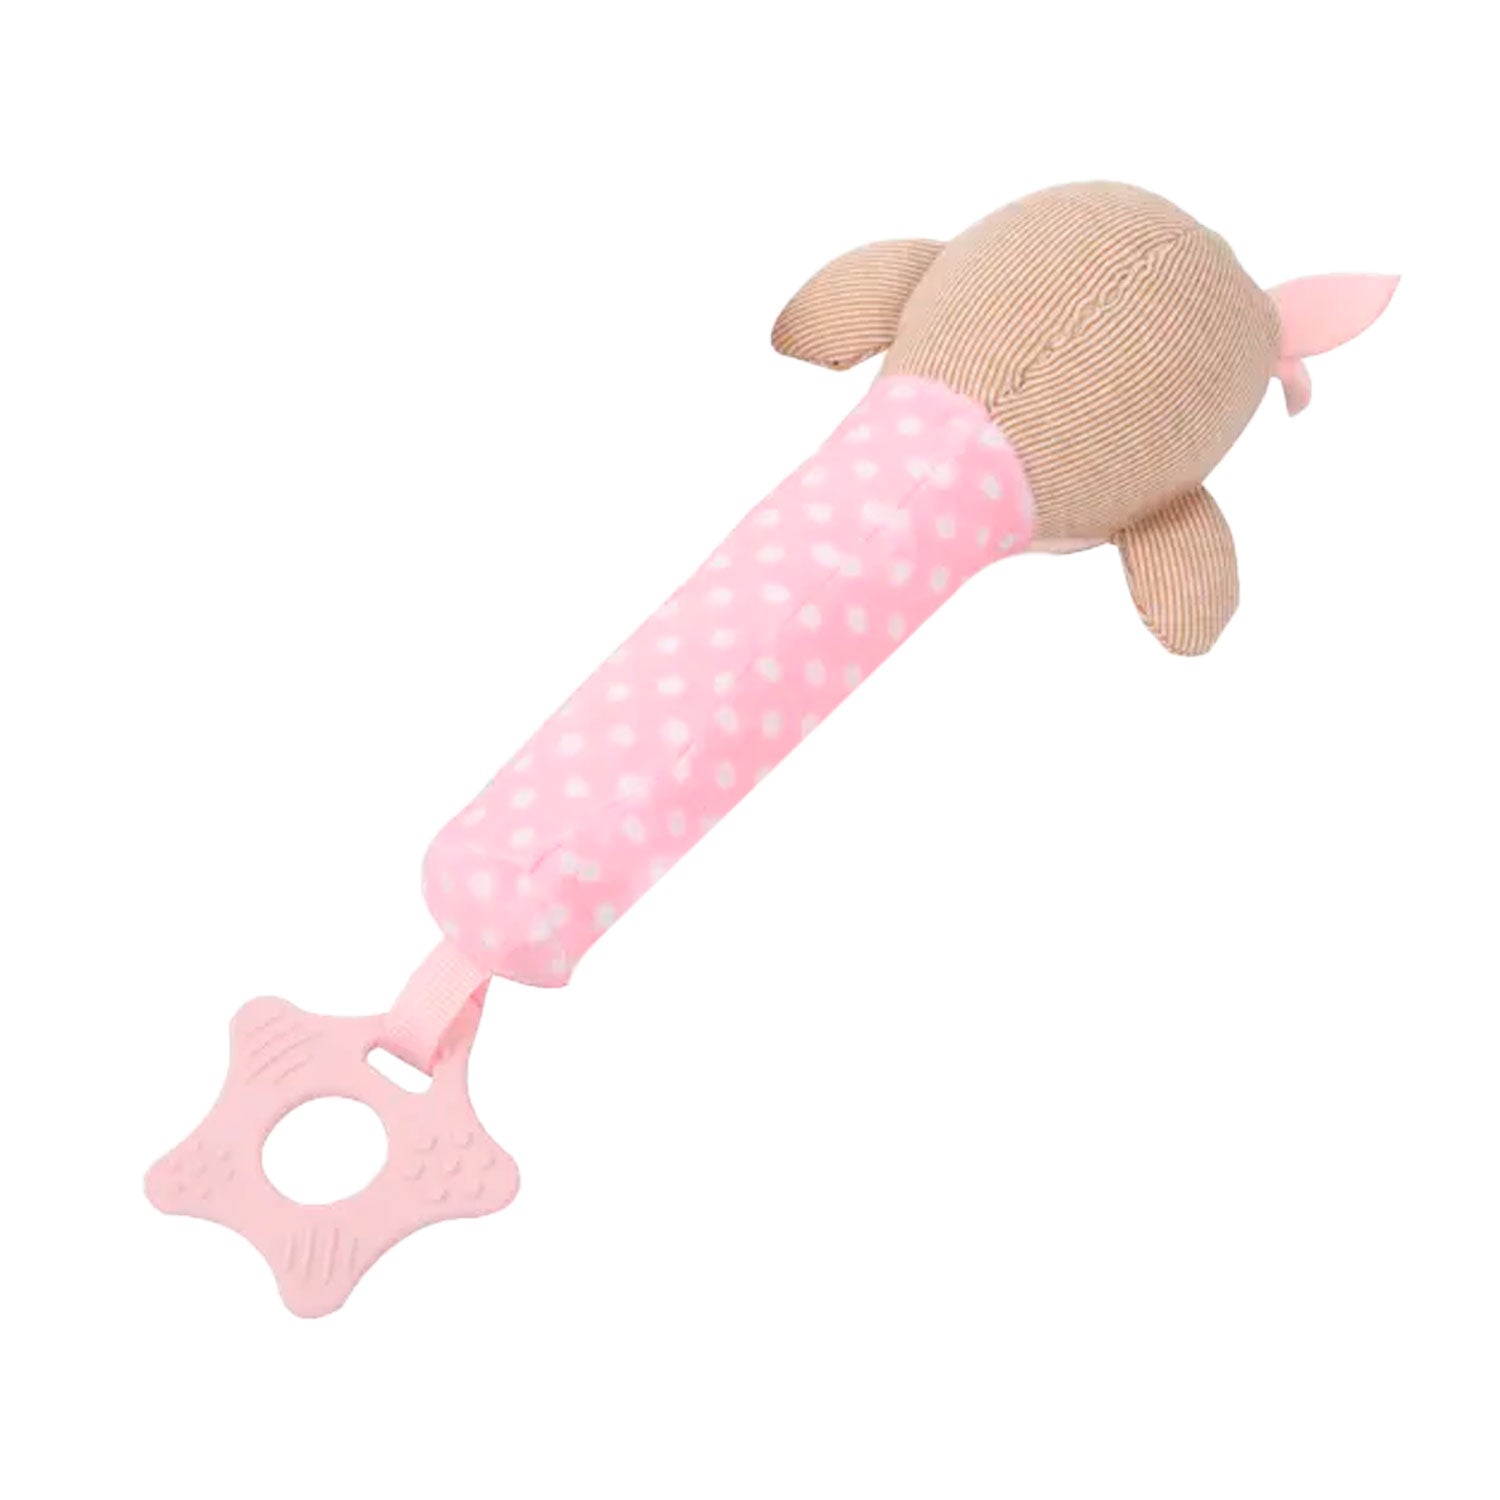 Baby Moo Pigtail Doll Squeaker With Teether Handheld Rattle Toy - Pink